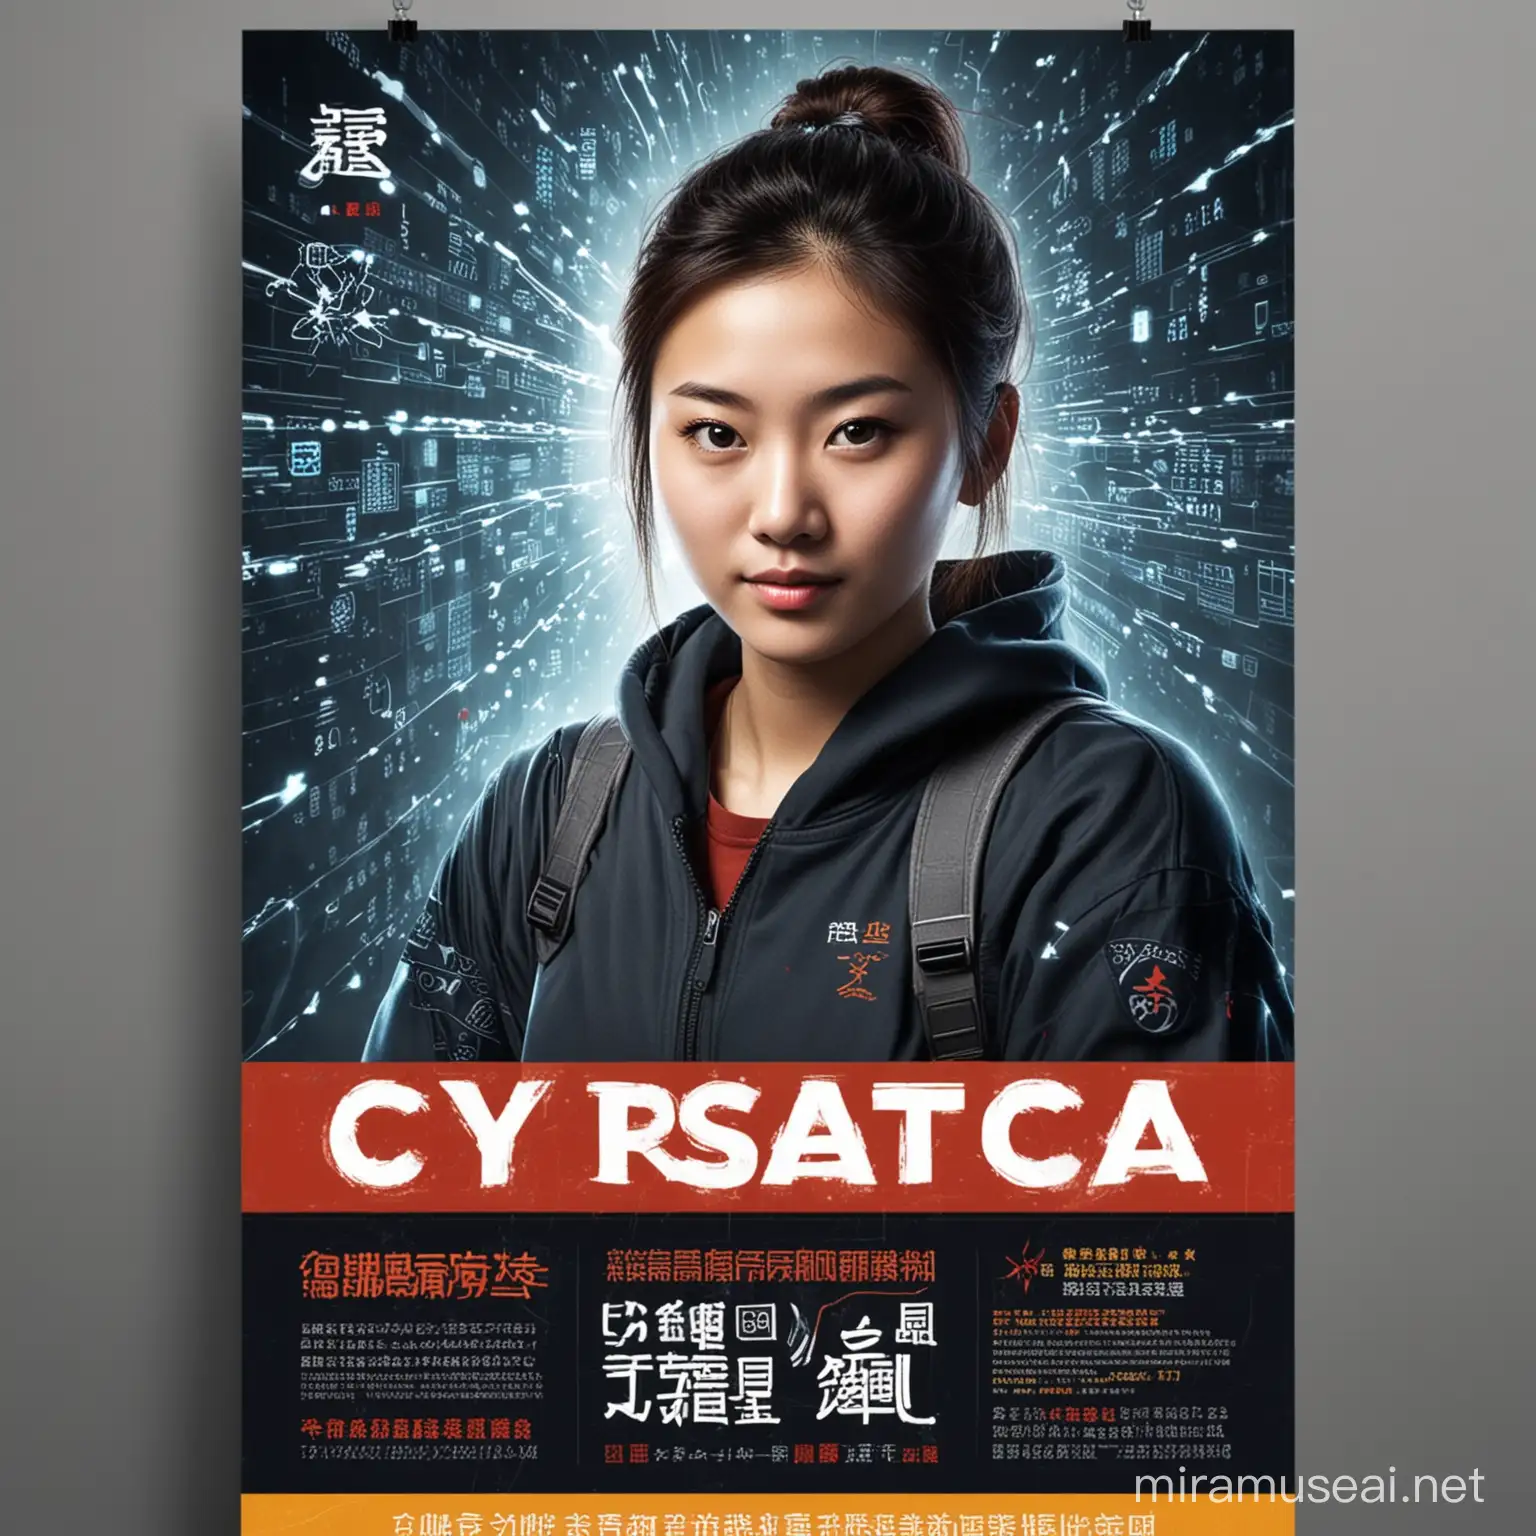 create a poster to introduce a course on cyberspace attack prevention for chinese college students